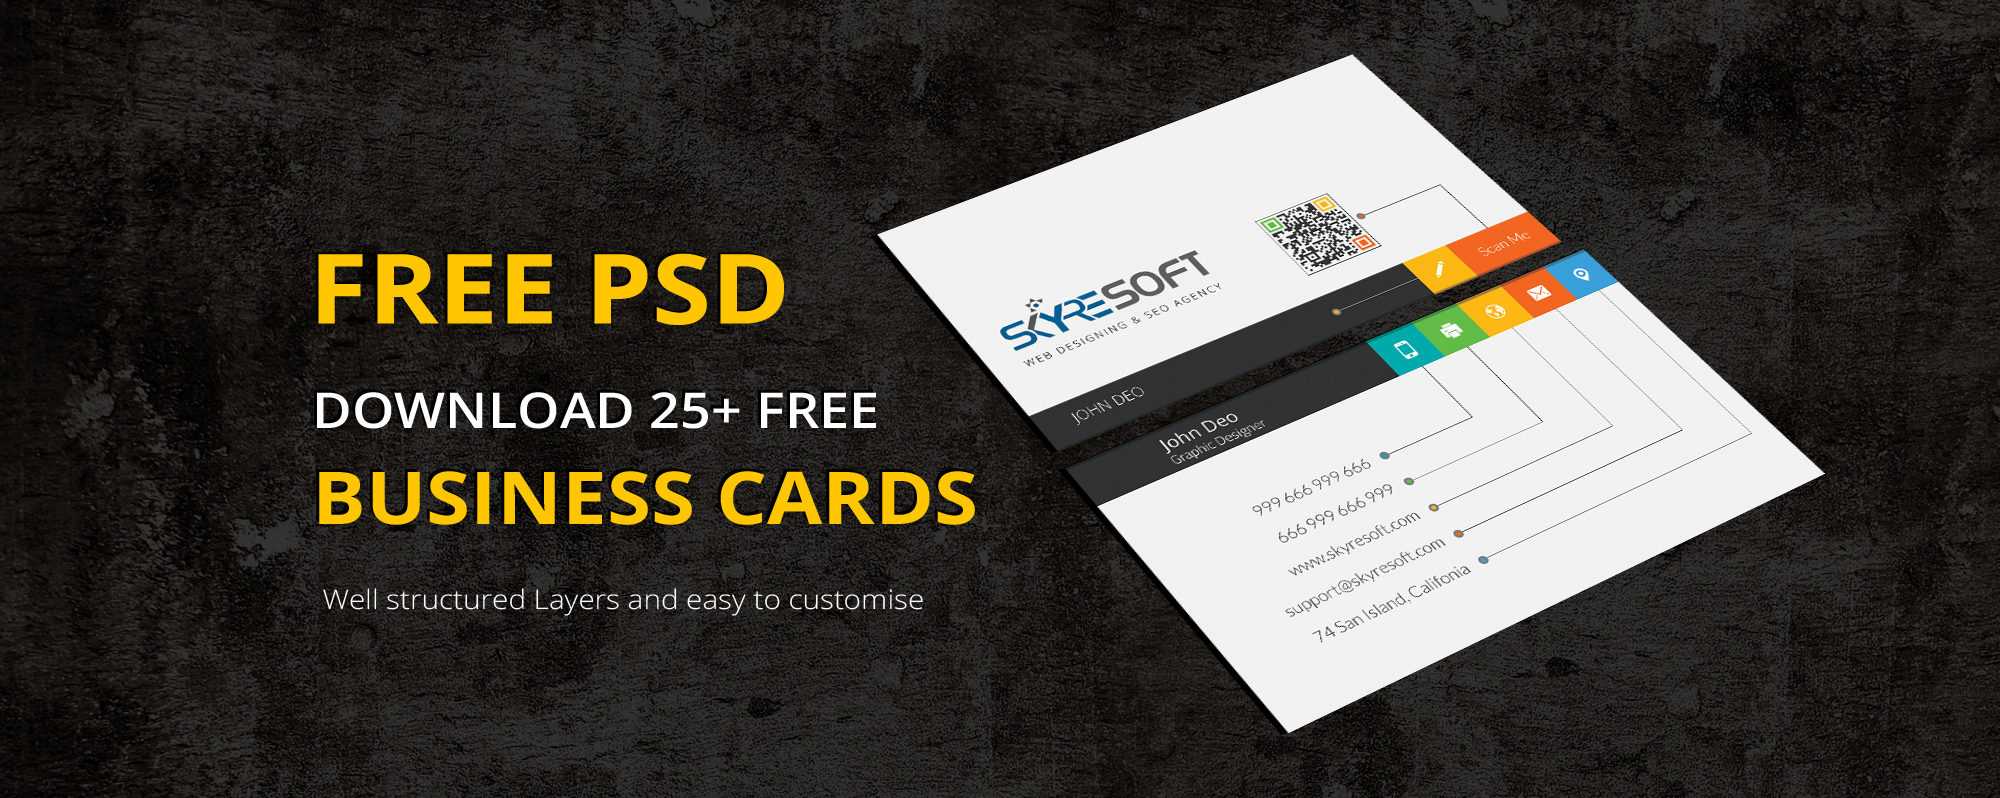 25 Creative Free Psd Business Card Templates 2019 Intended For Web Design Business Cards Templates